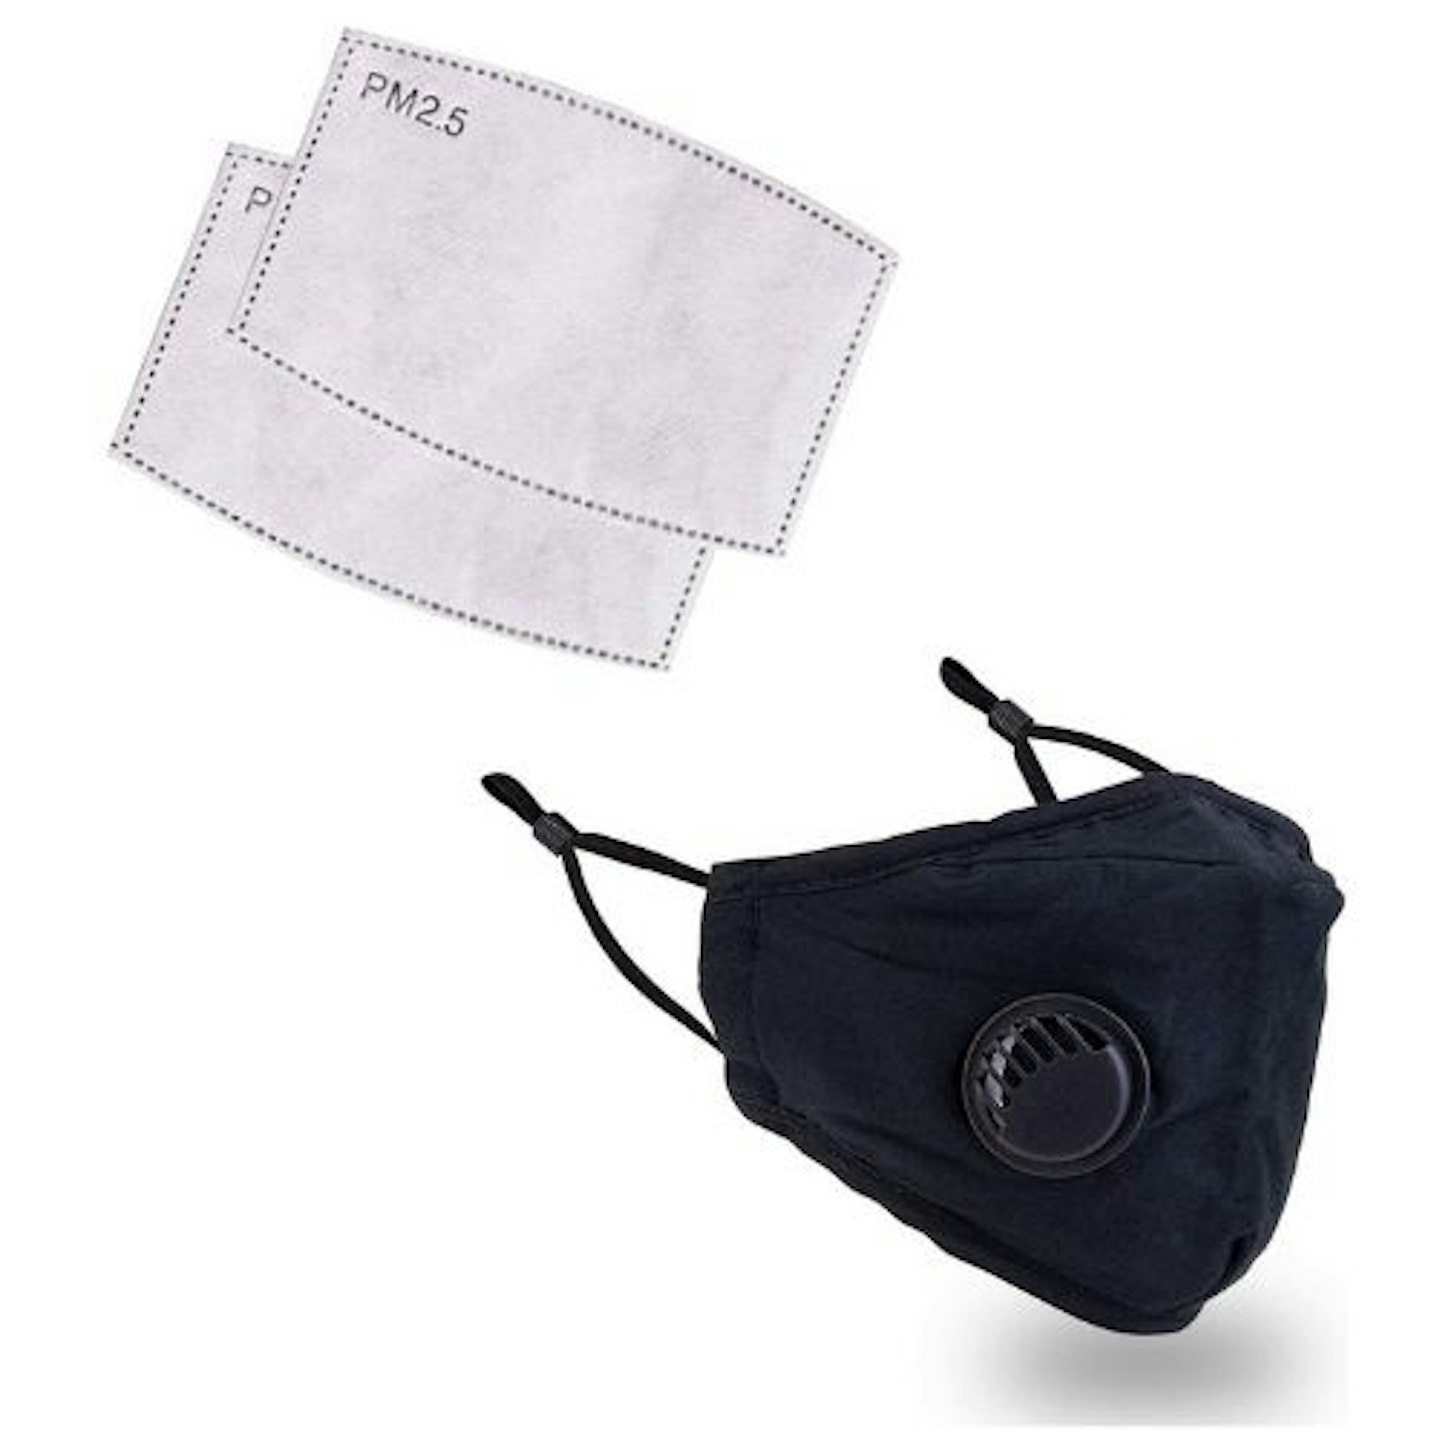 Black Face Mask Reusable Washable Face Mask with Valve and Filter